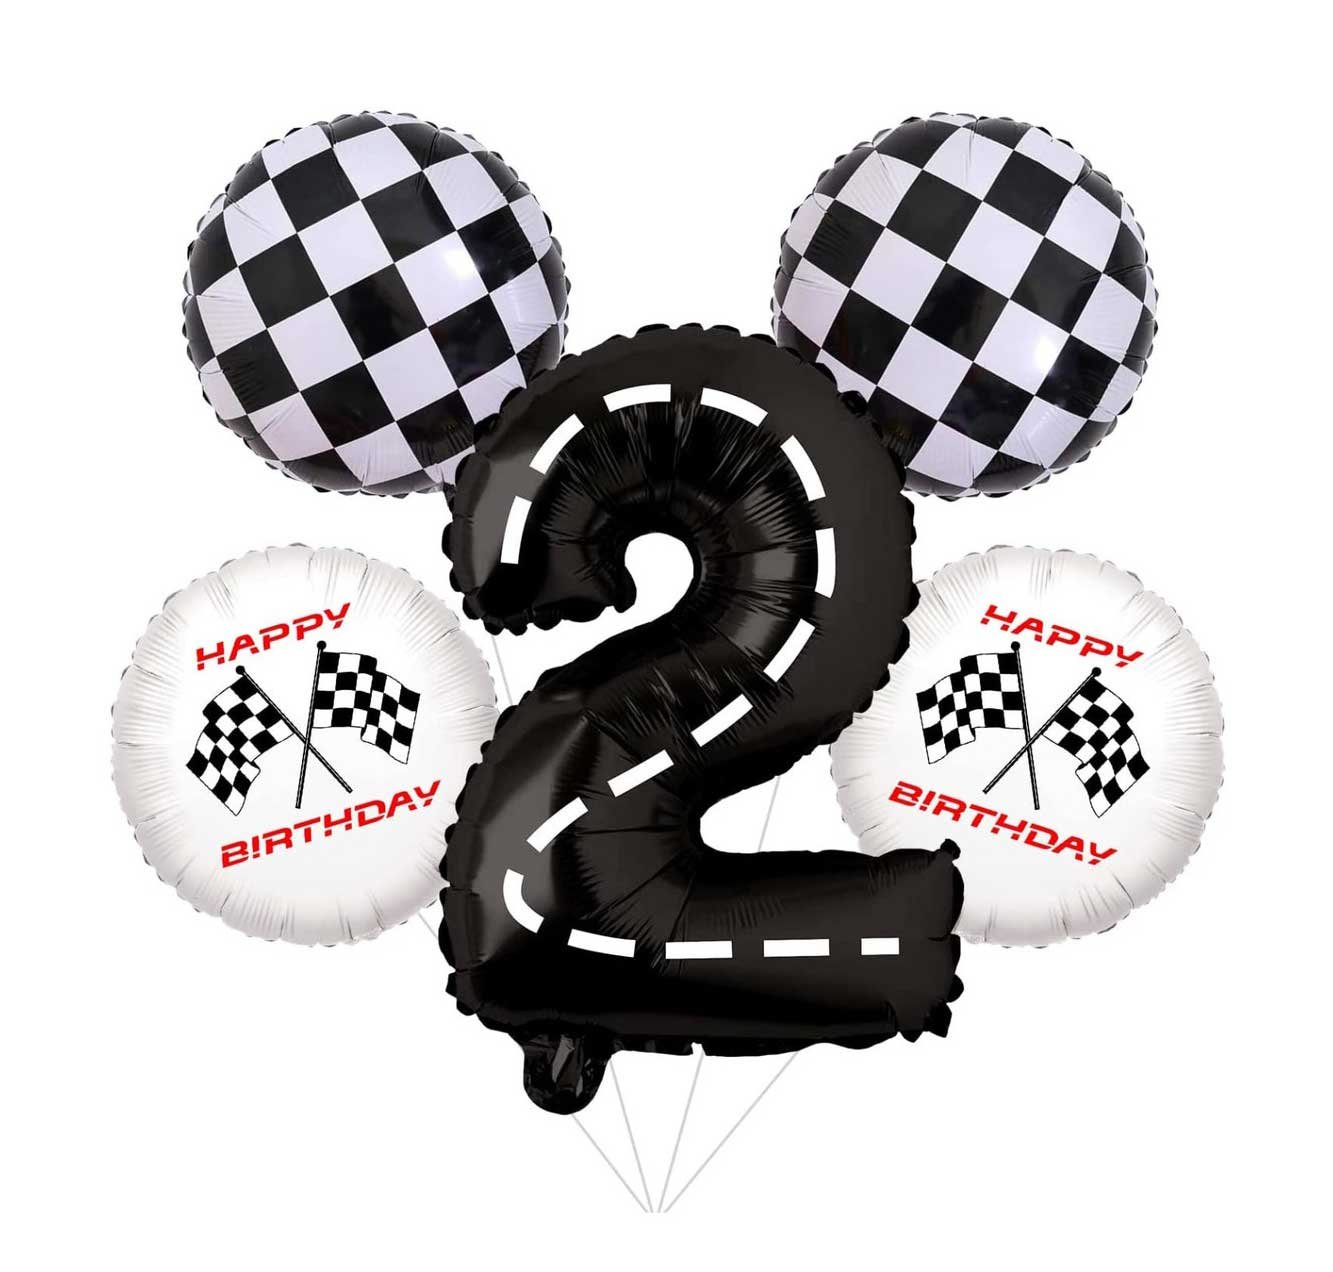 Two Fast Second Birthday Invitation Growing up Two Fast Race 